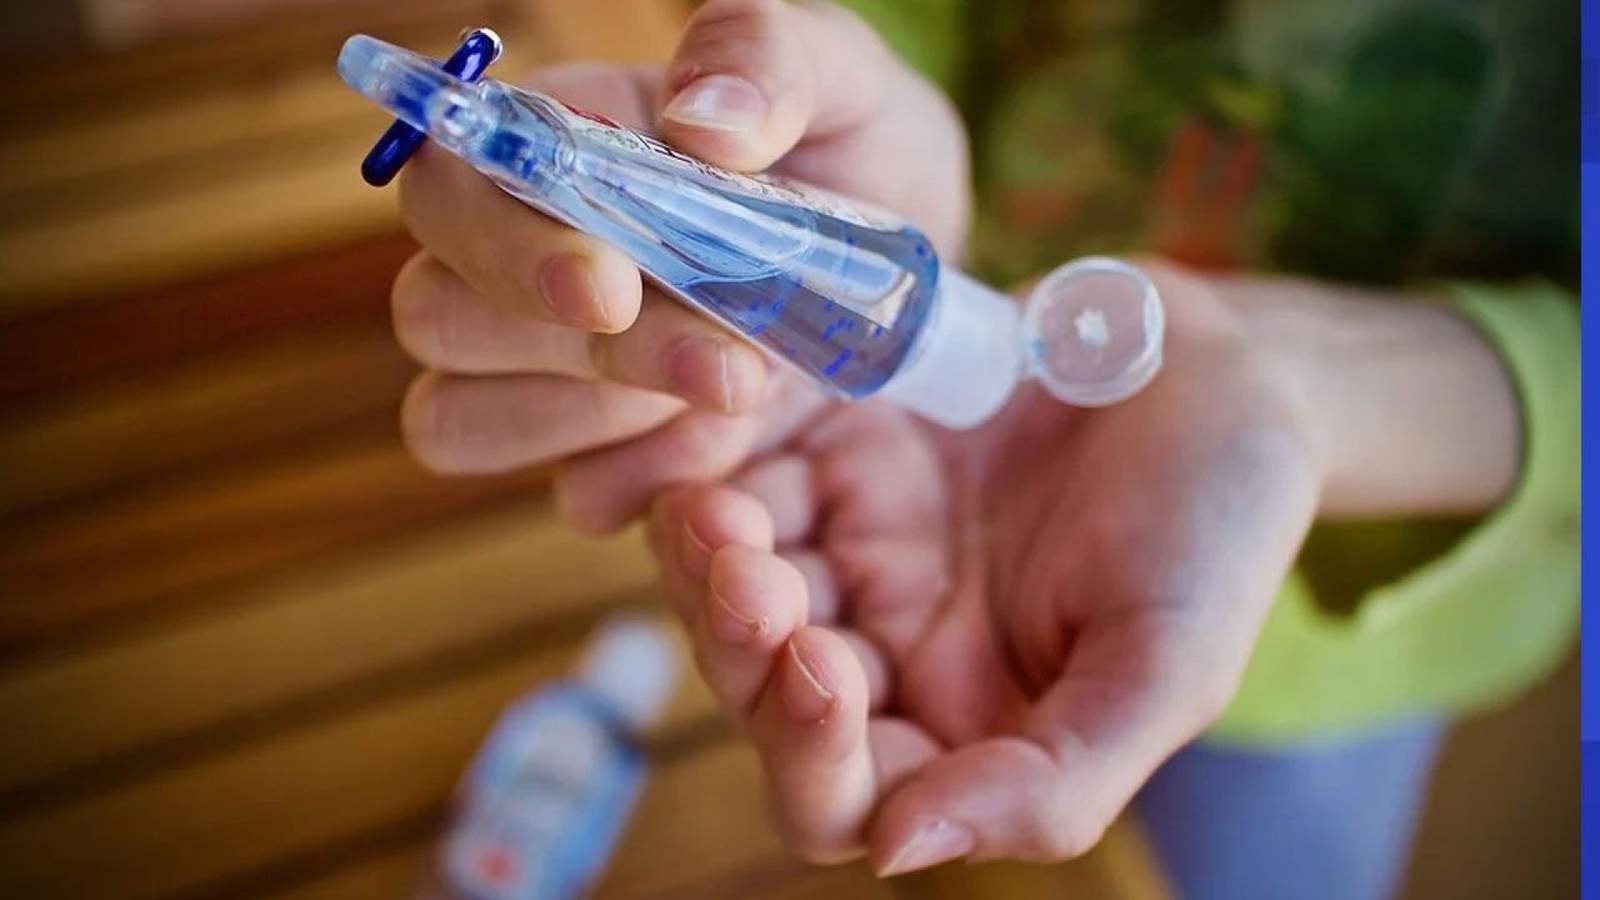 Don’t Drink It: People Are Dying After Drinking Hand Sanitizer, Cdc Says photo